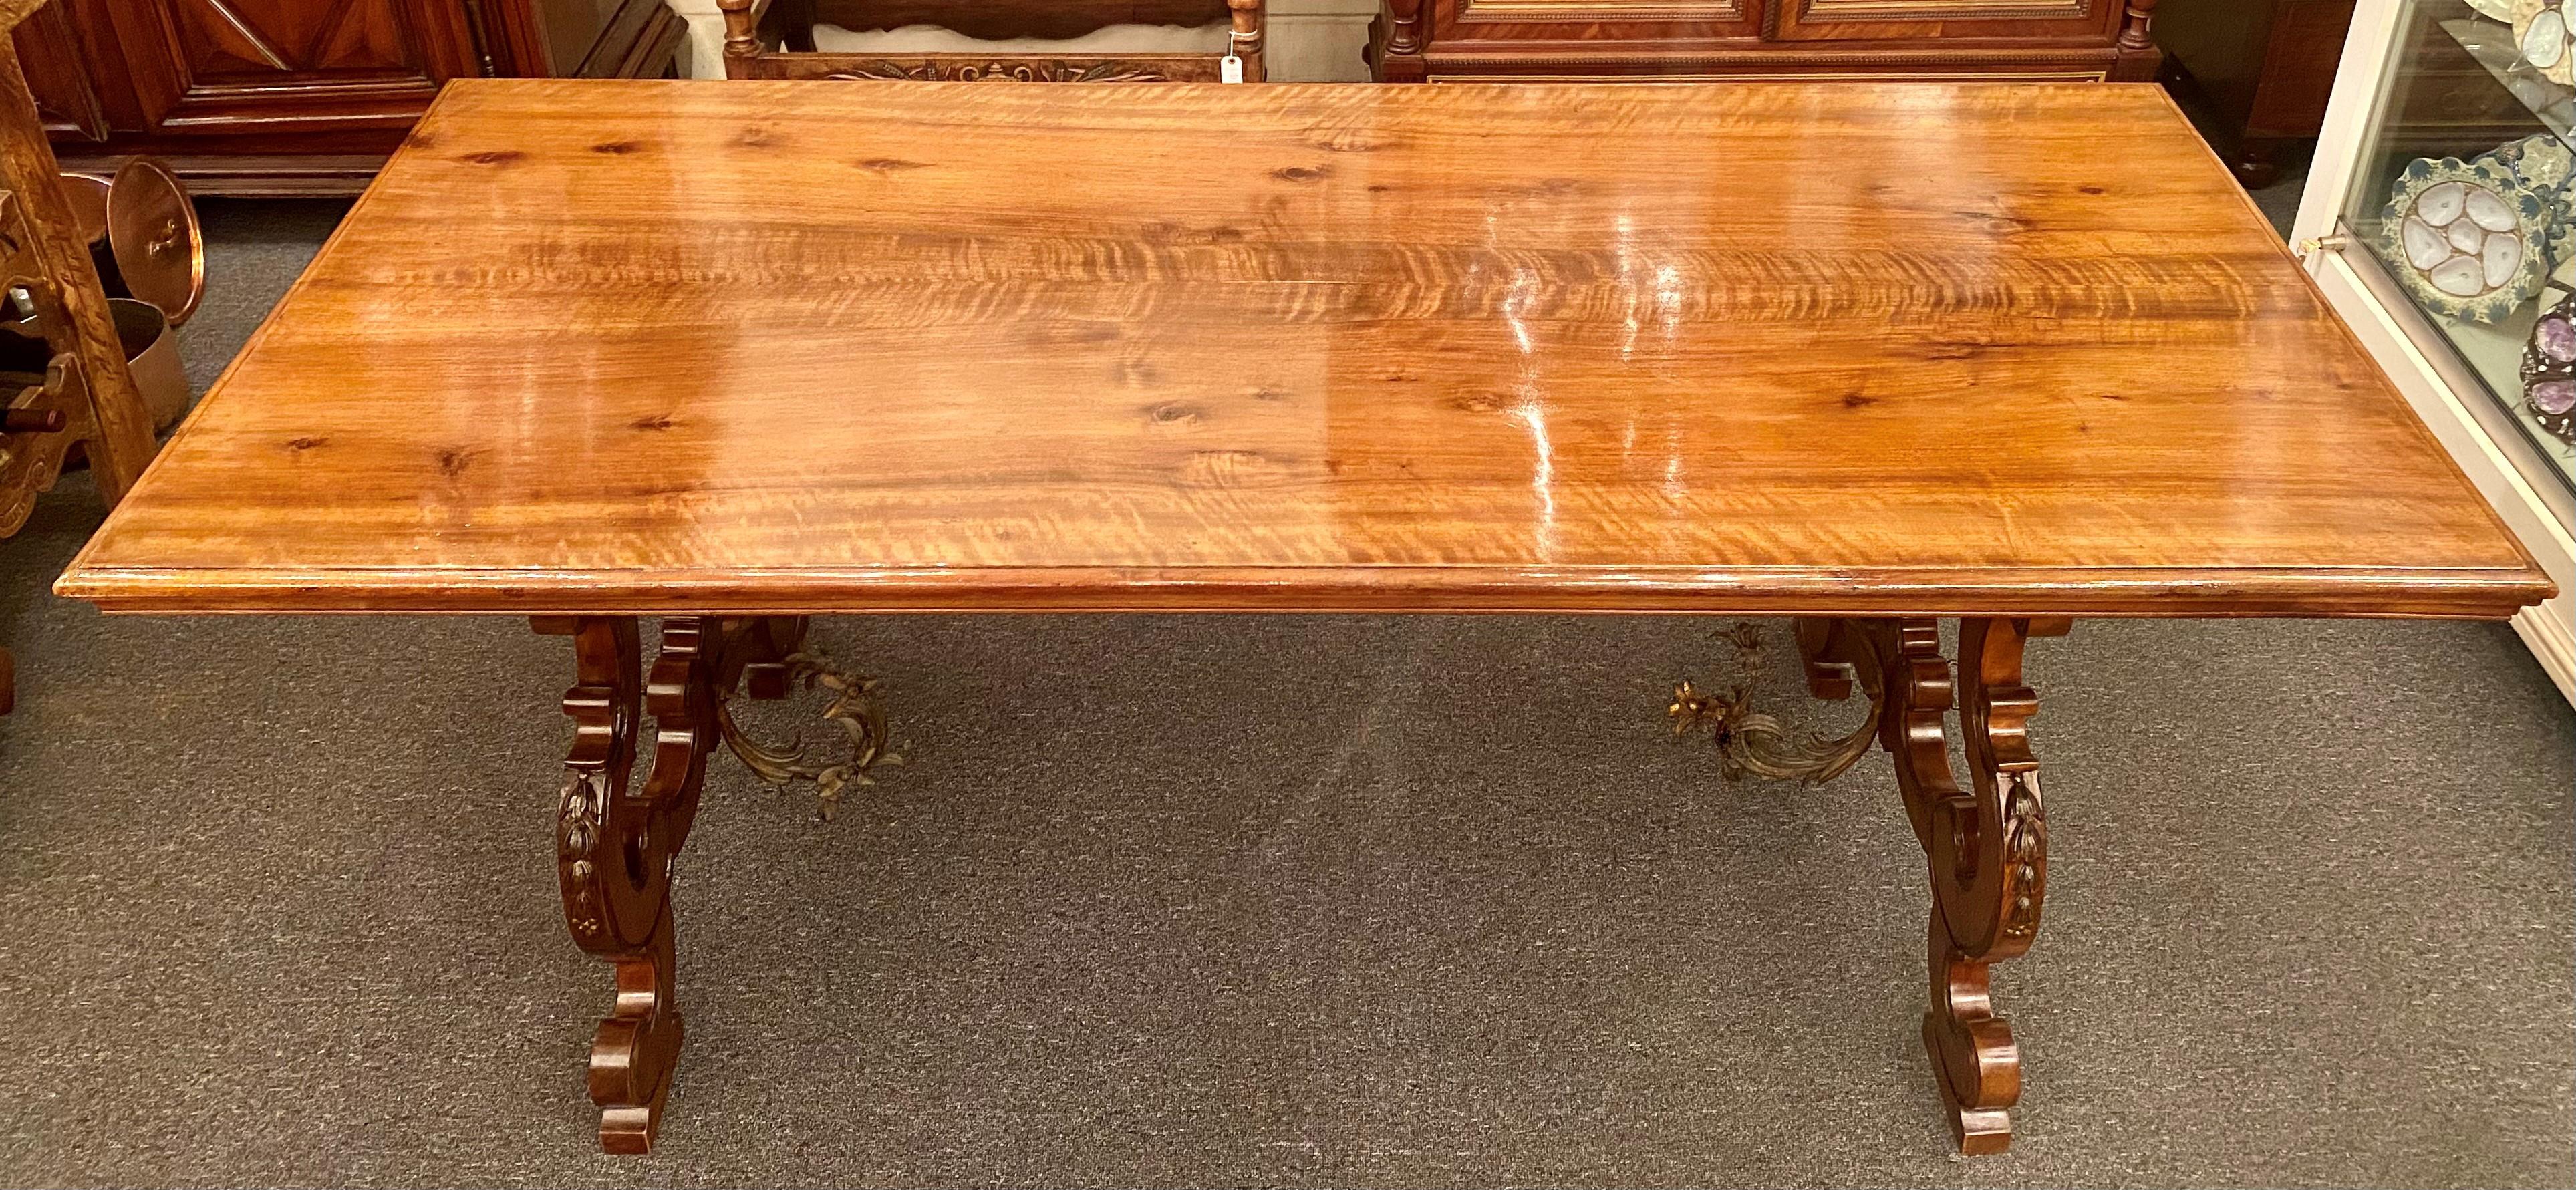 19th Century Antique French Walnut Trestle Dining Table with Iron Work Detail circa 1860-1880